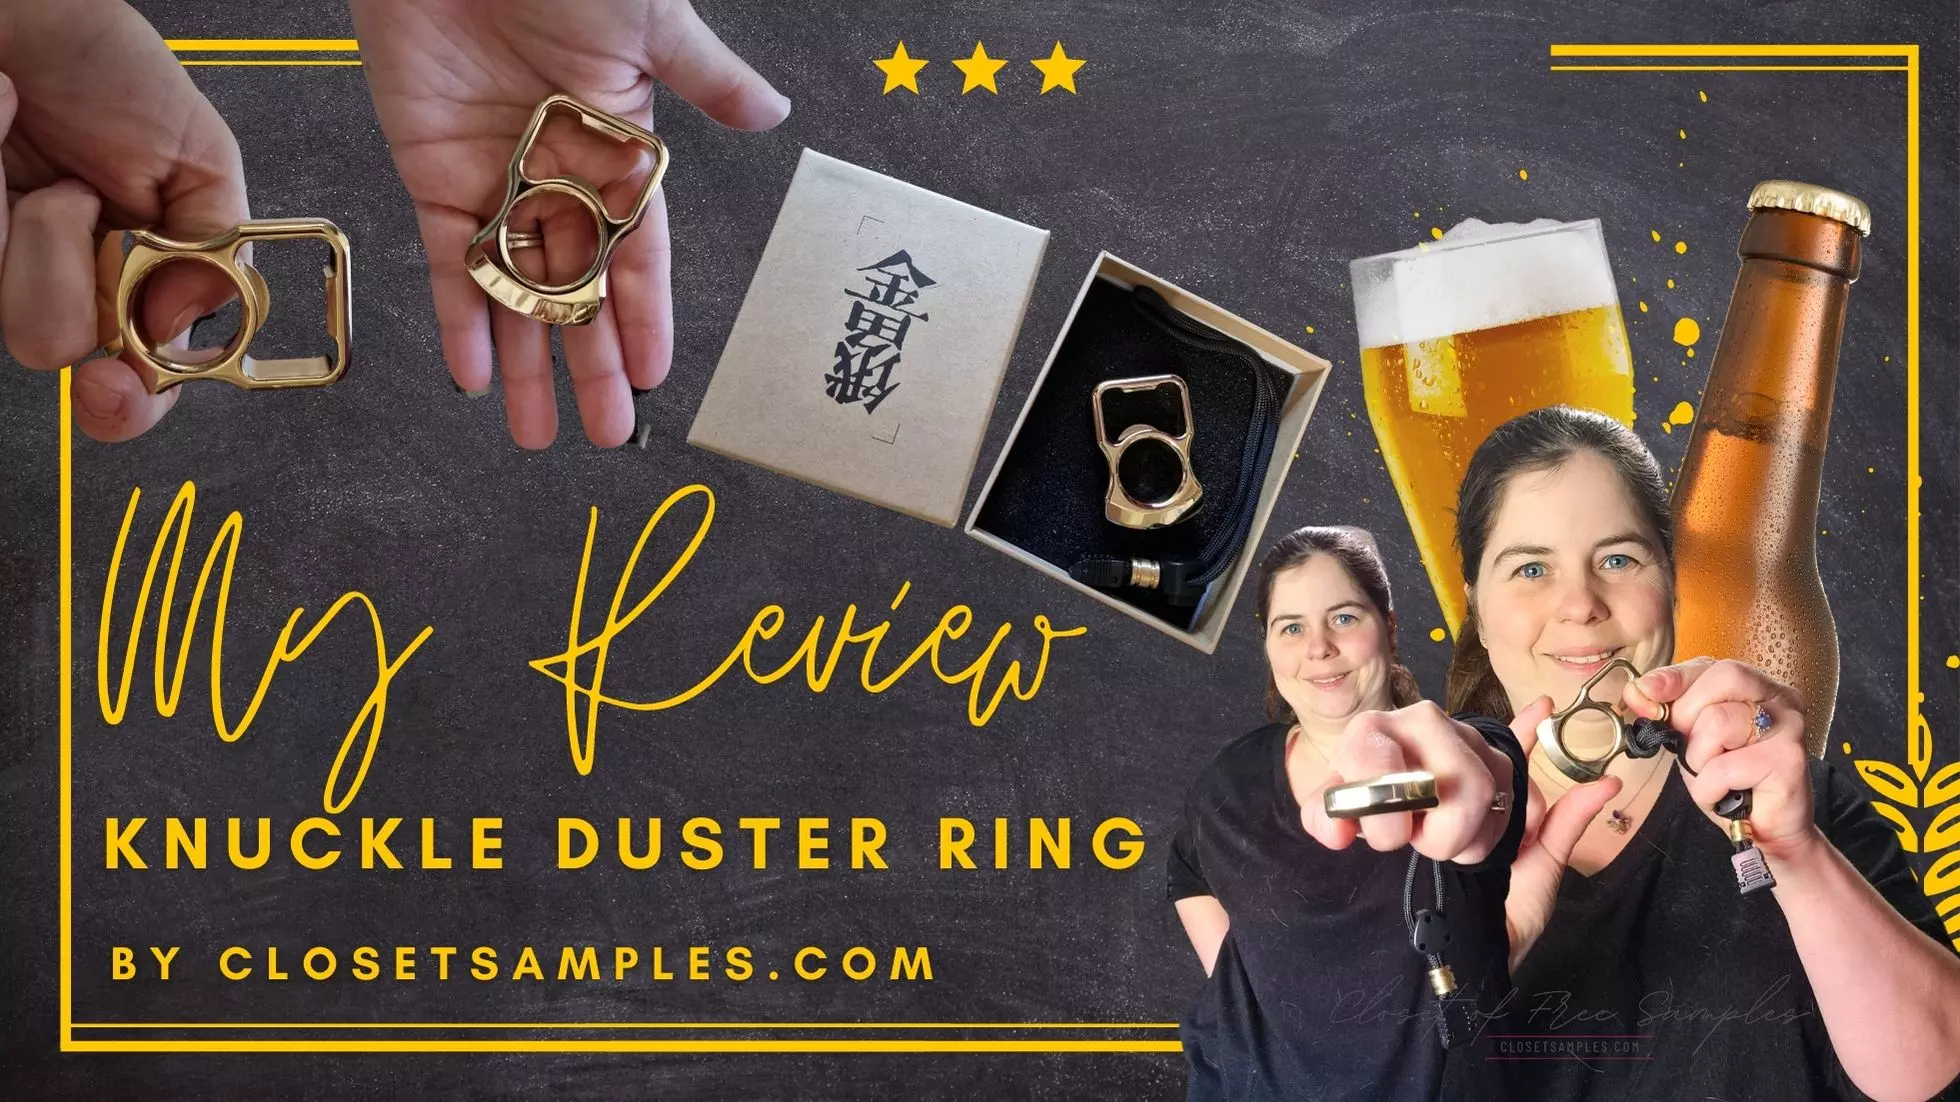 Knuckle Duster Ring Review